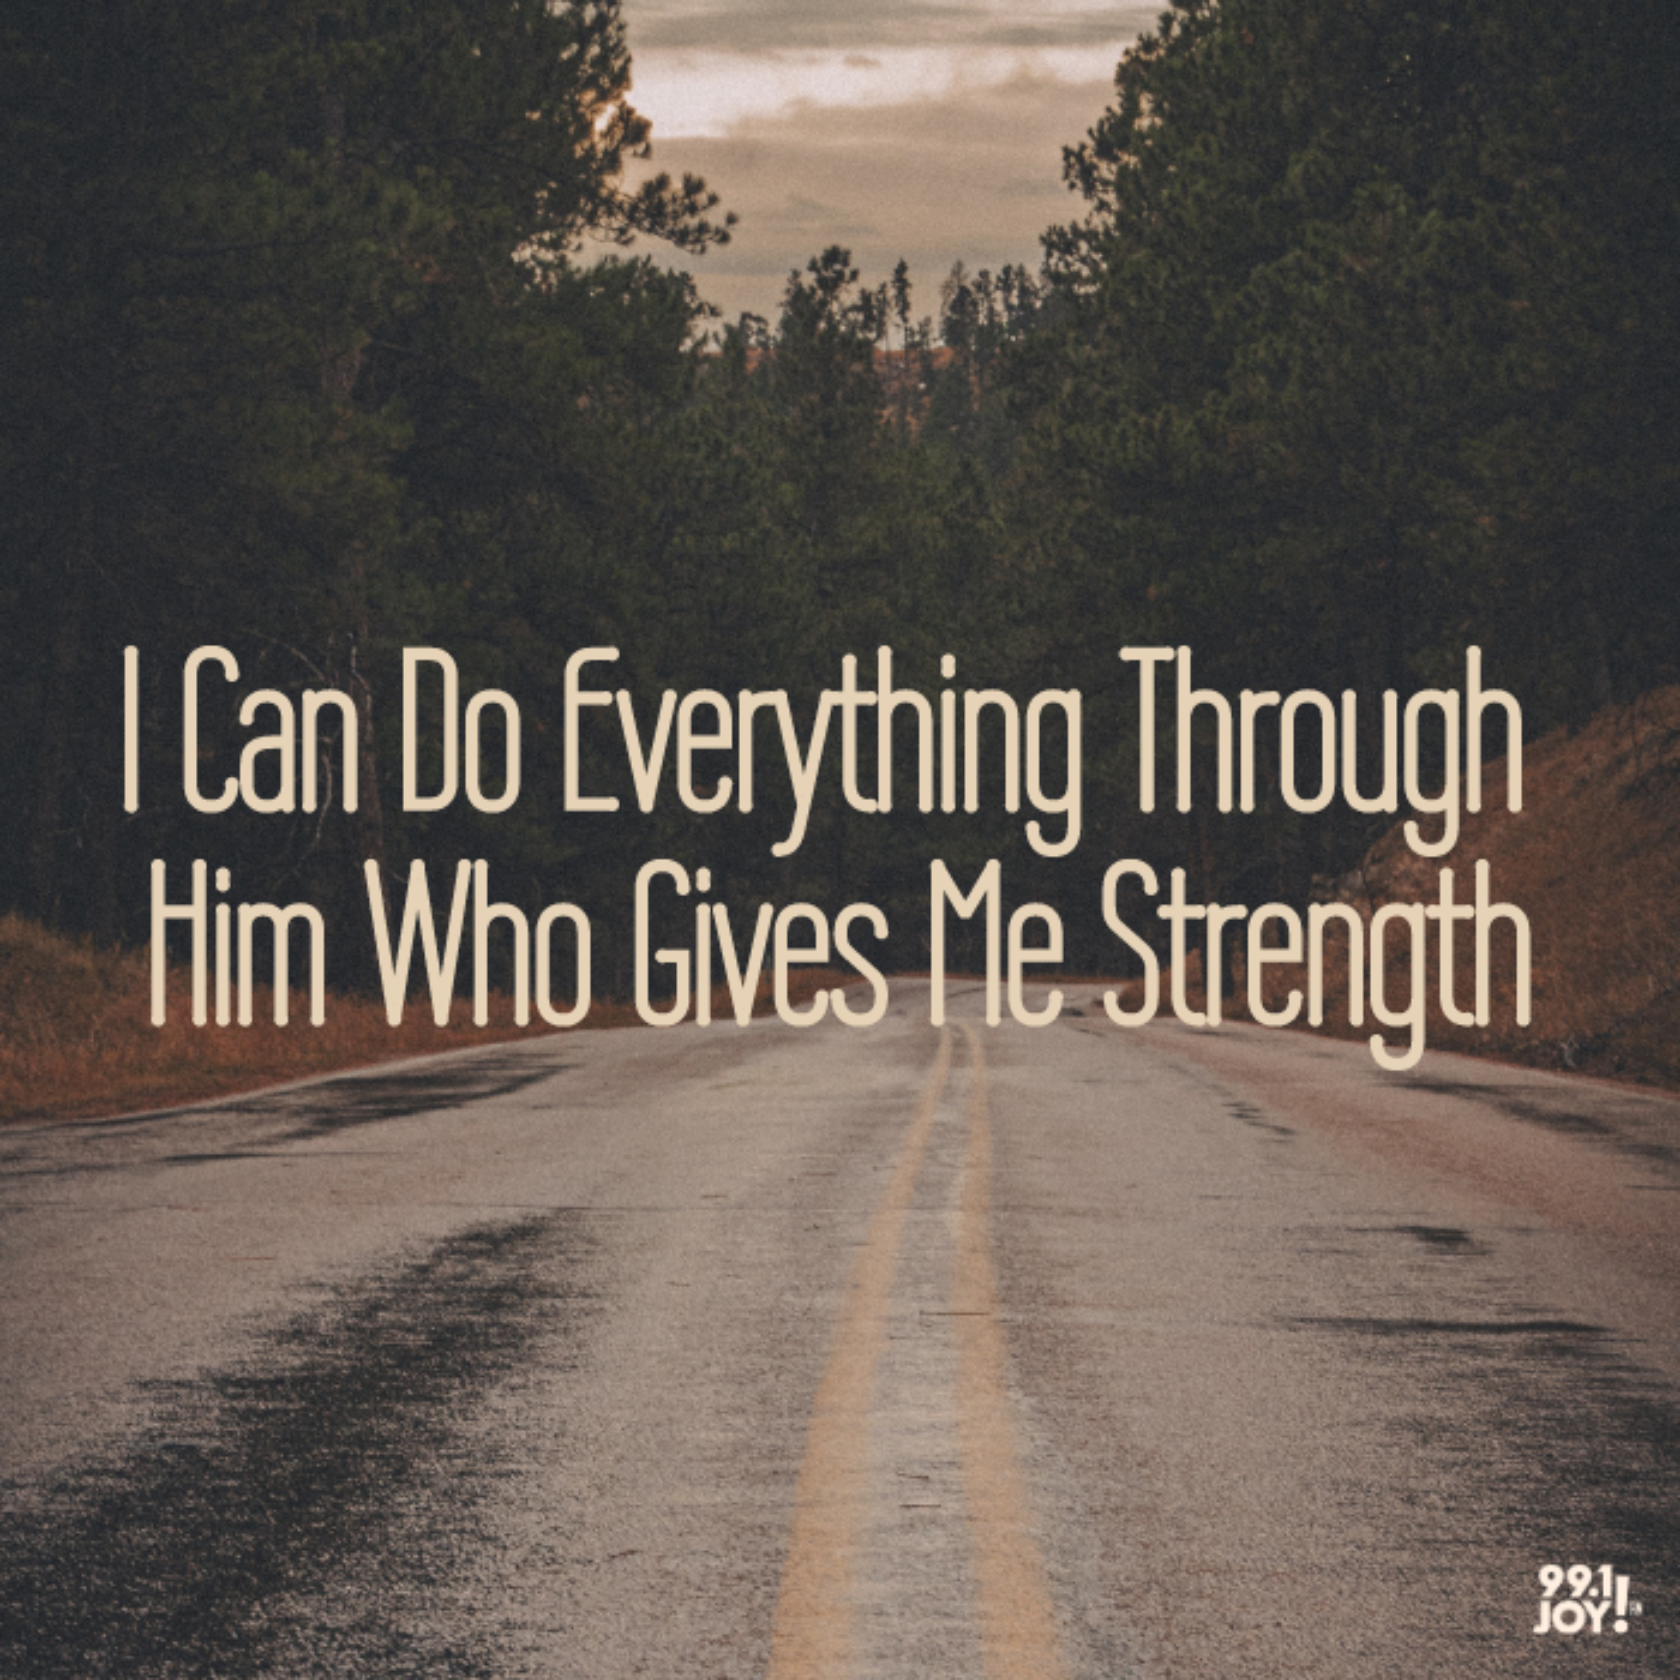 I Can Do Everything Through Him Who Gives Me Strength